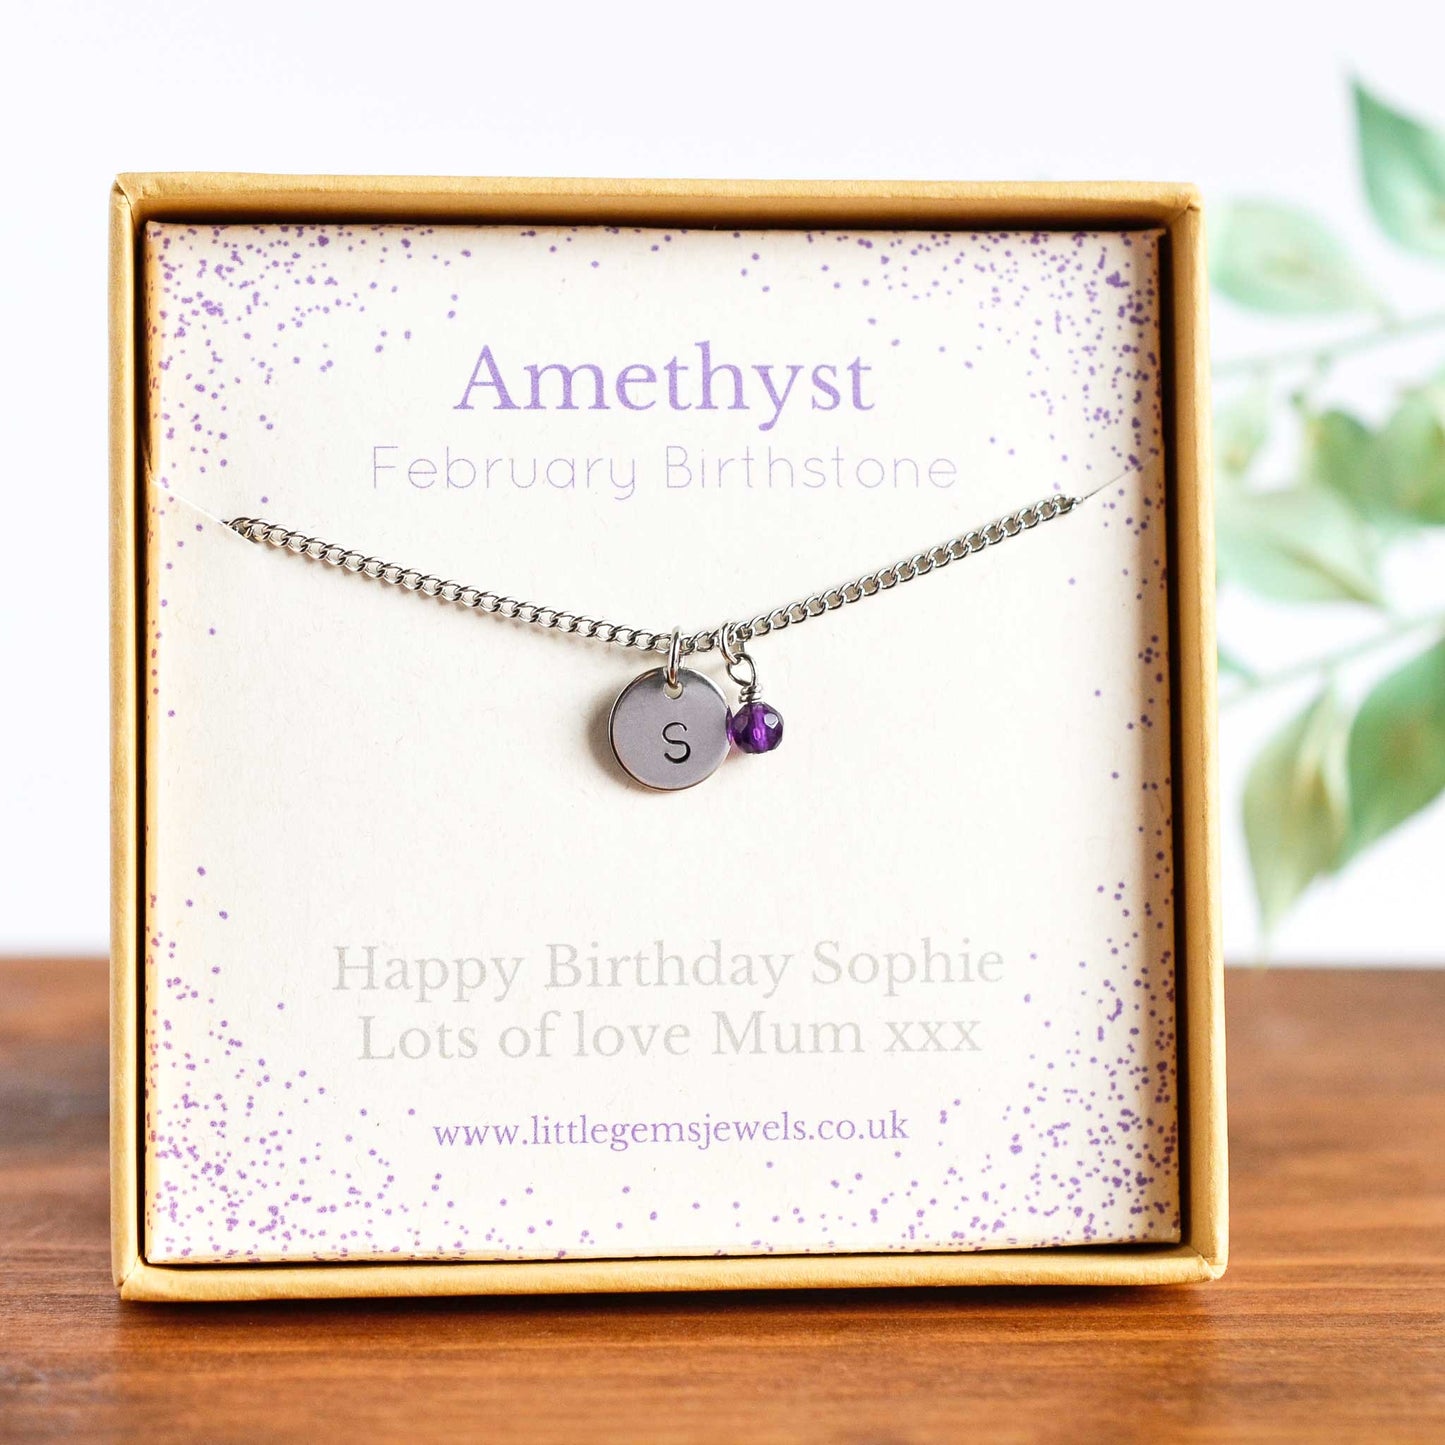 February Birthstone necklace with initial charm & personalised gift message in eco friendly gift box